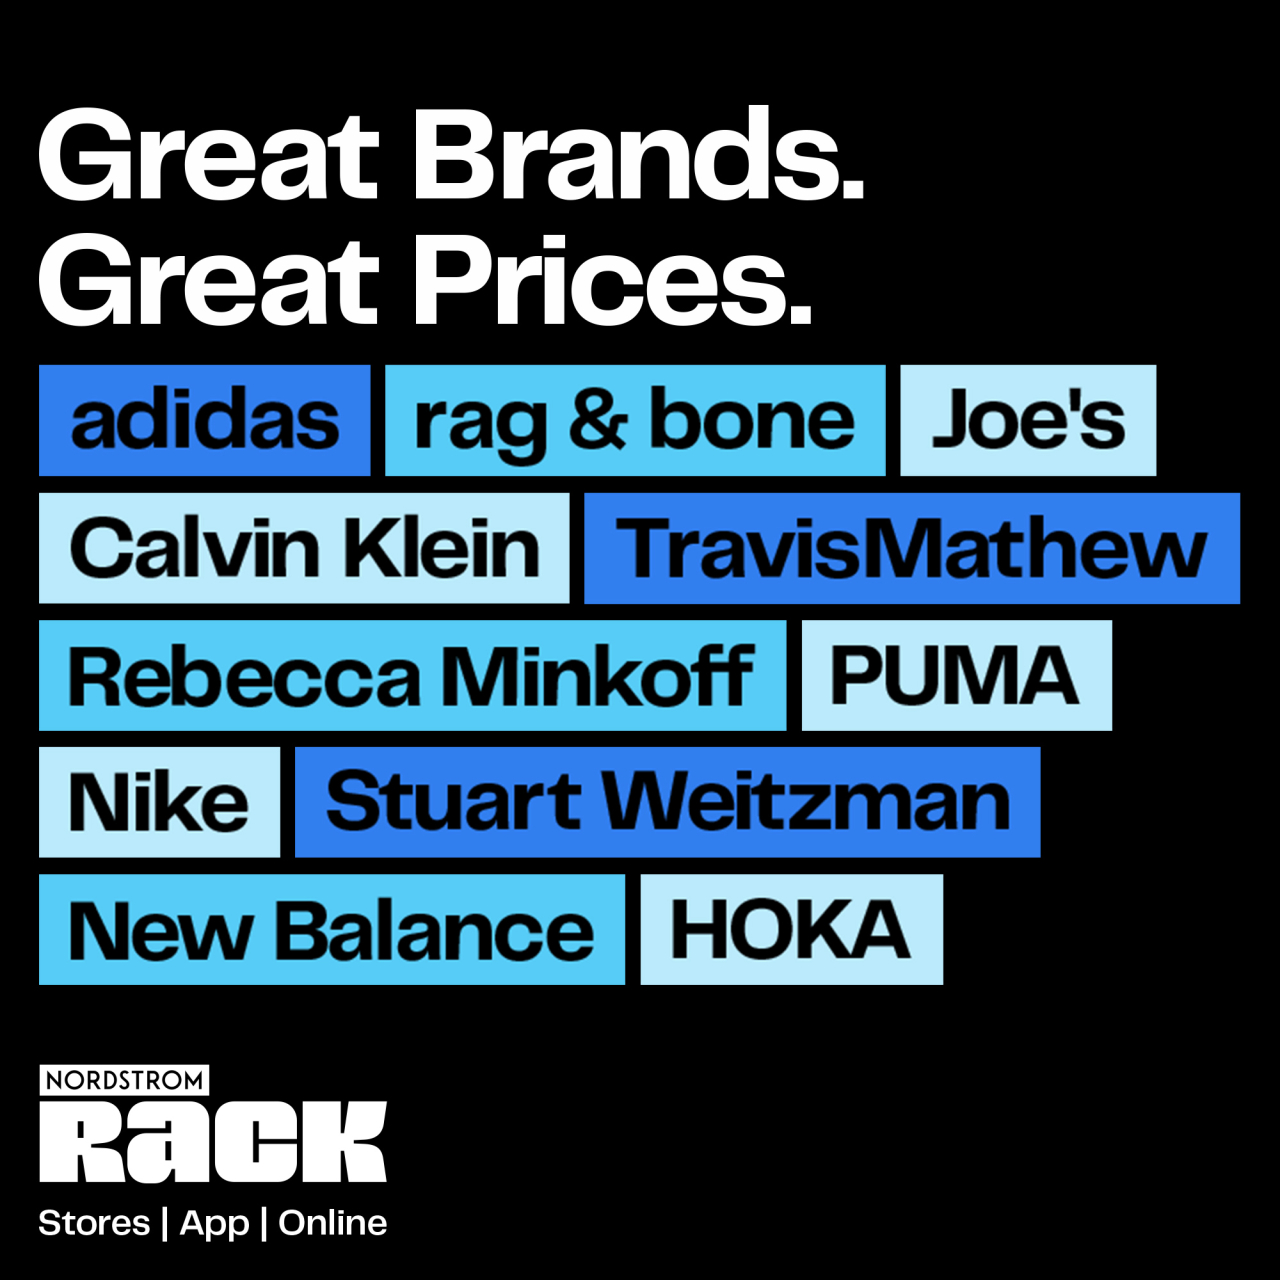 Great Brand. Great Prices.